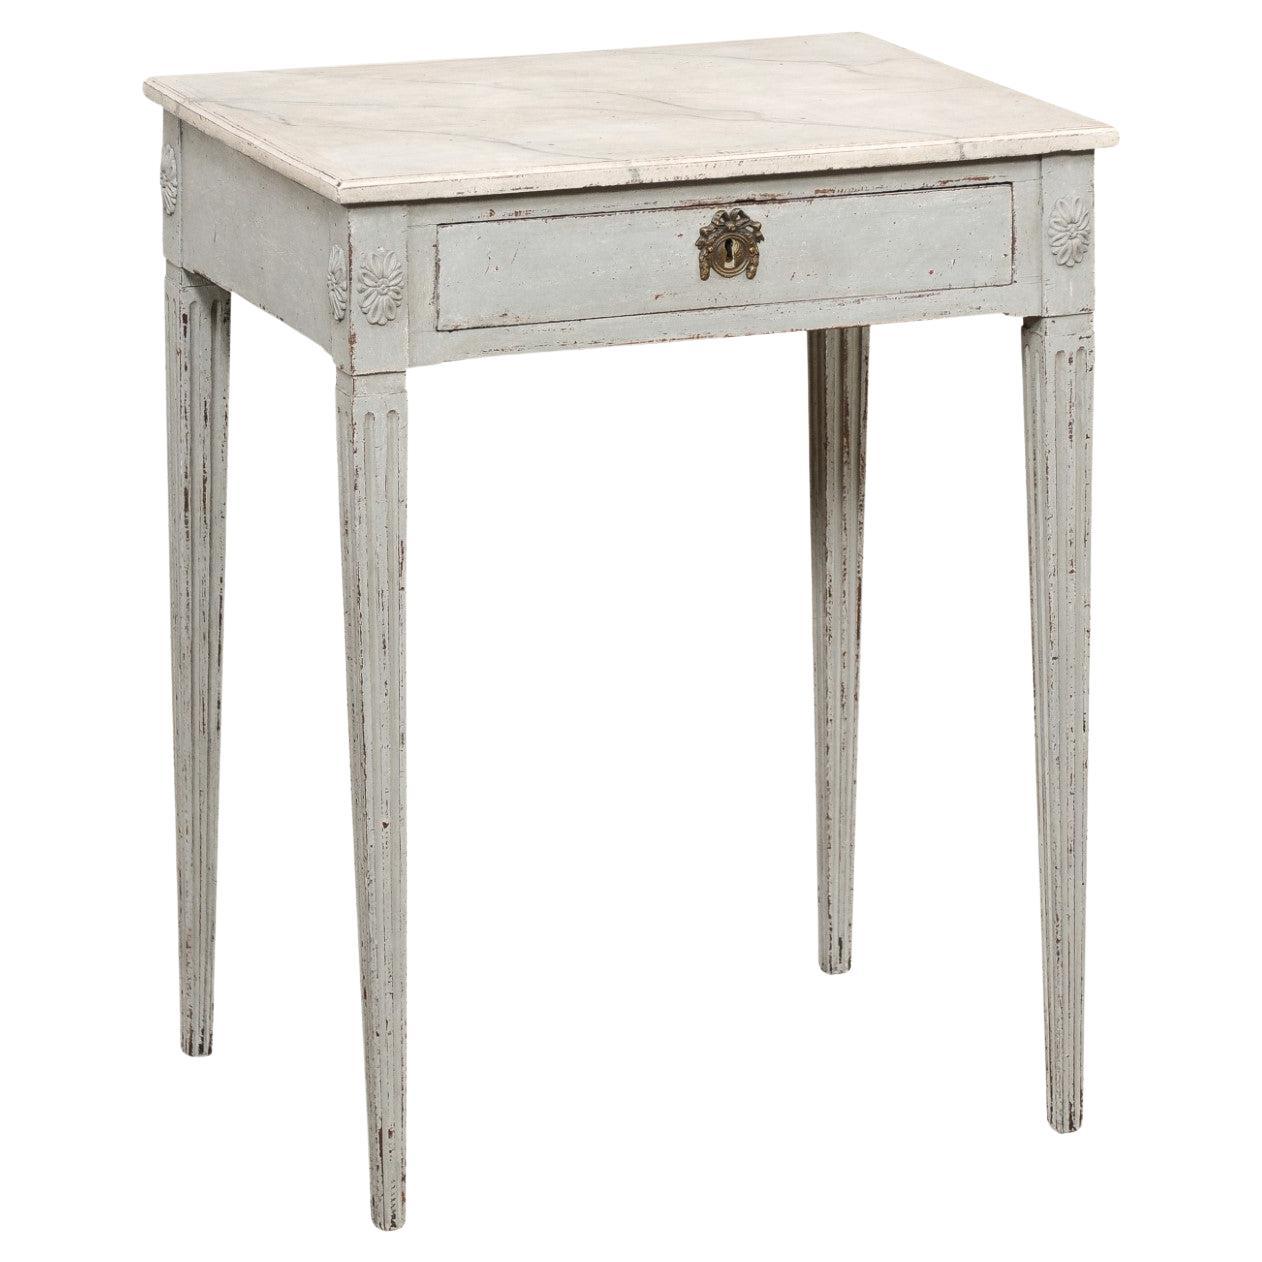 Swedish Late Gustavian 1820s Painted Wood Console Table with Single Drawer